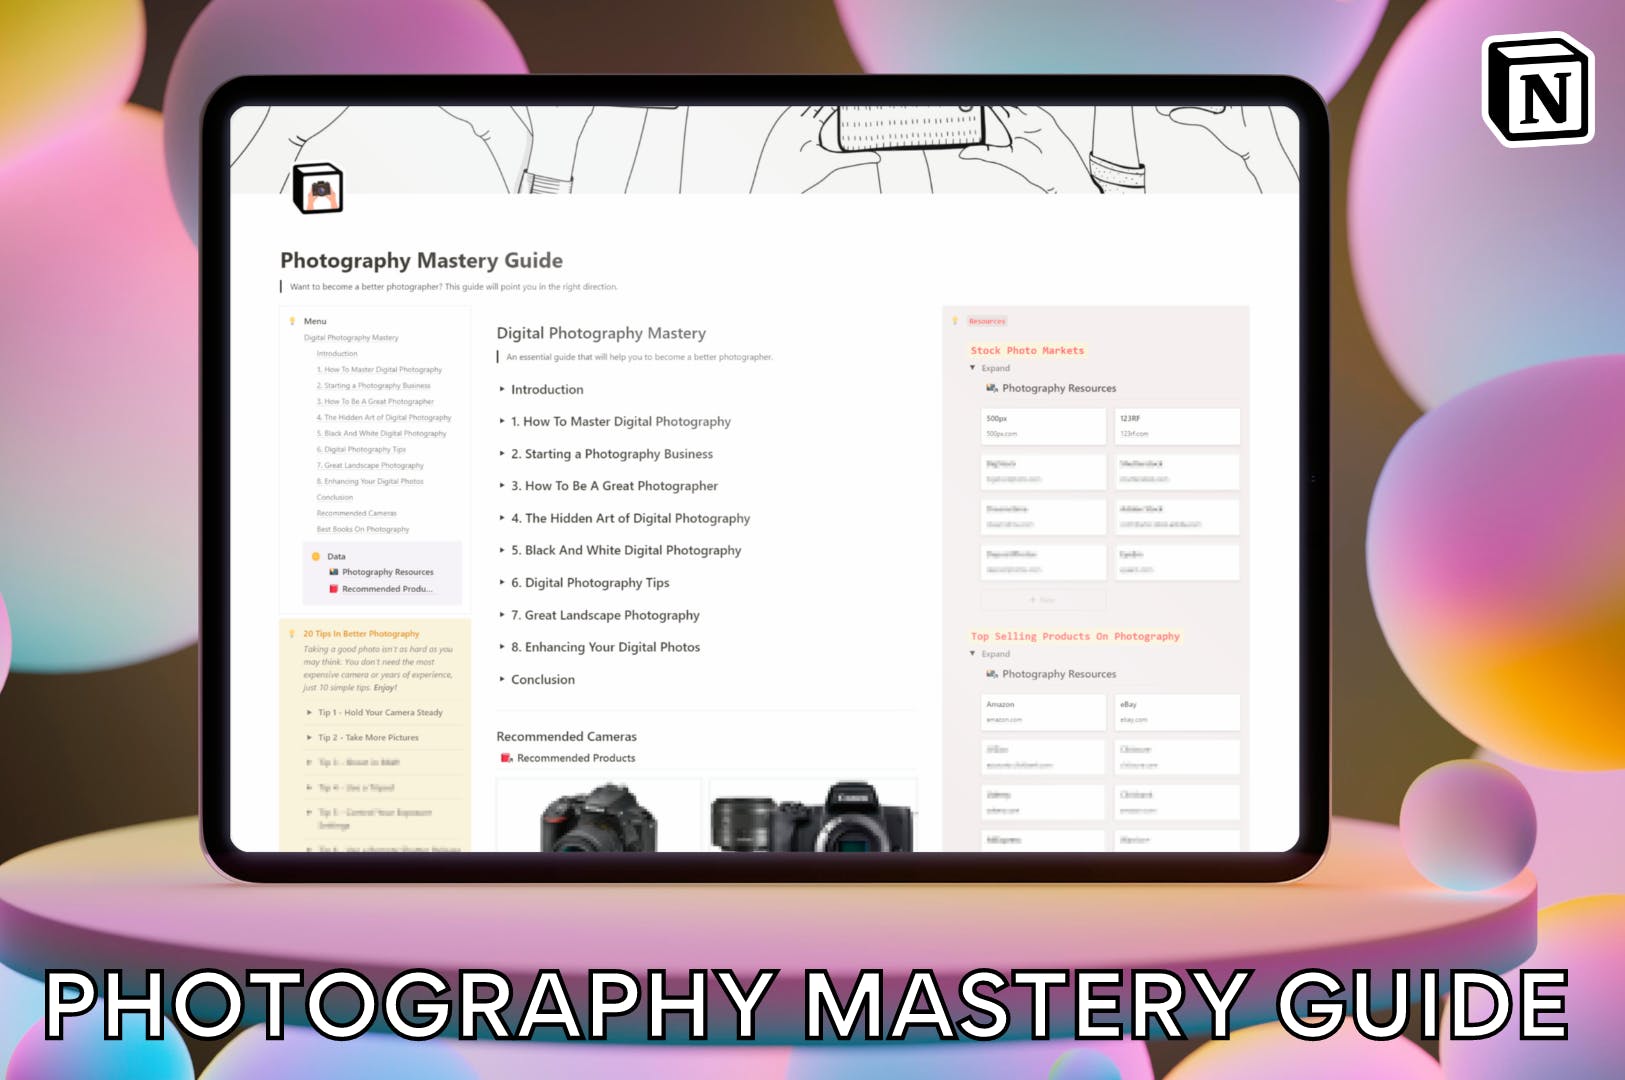 Photography Mastery Guide media 2